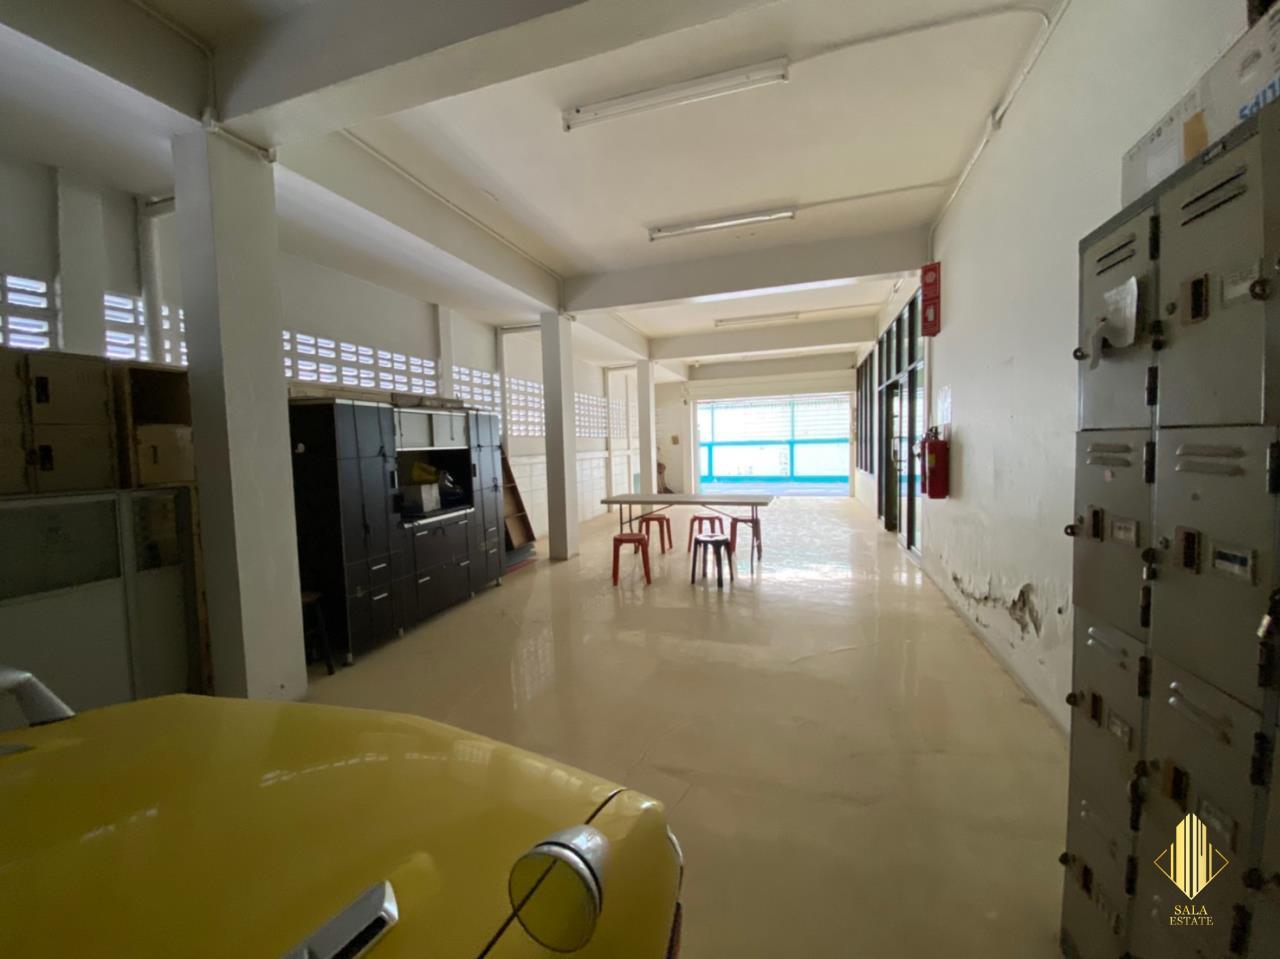 SALA ESTATE Agency's COMMERCIAL BUILDING OFFICE FOR SALE / RENT - SUSAWAD 9, 1400 SQM 3 FLOORS 10 ROOMS 2